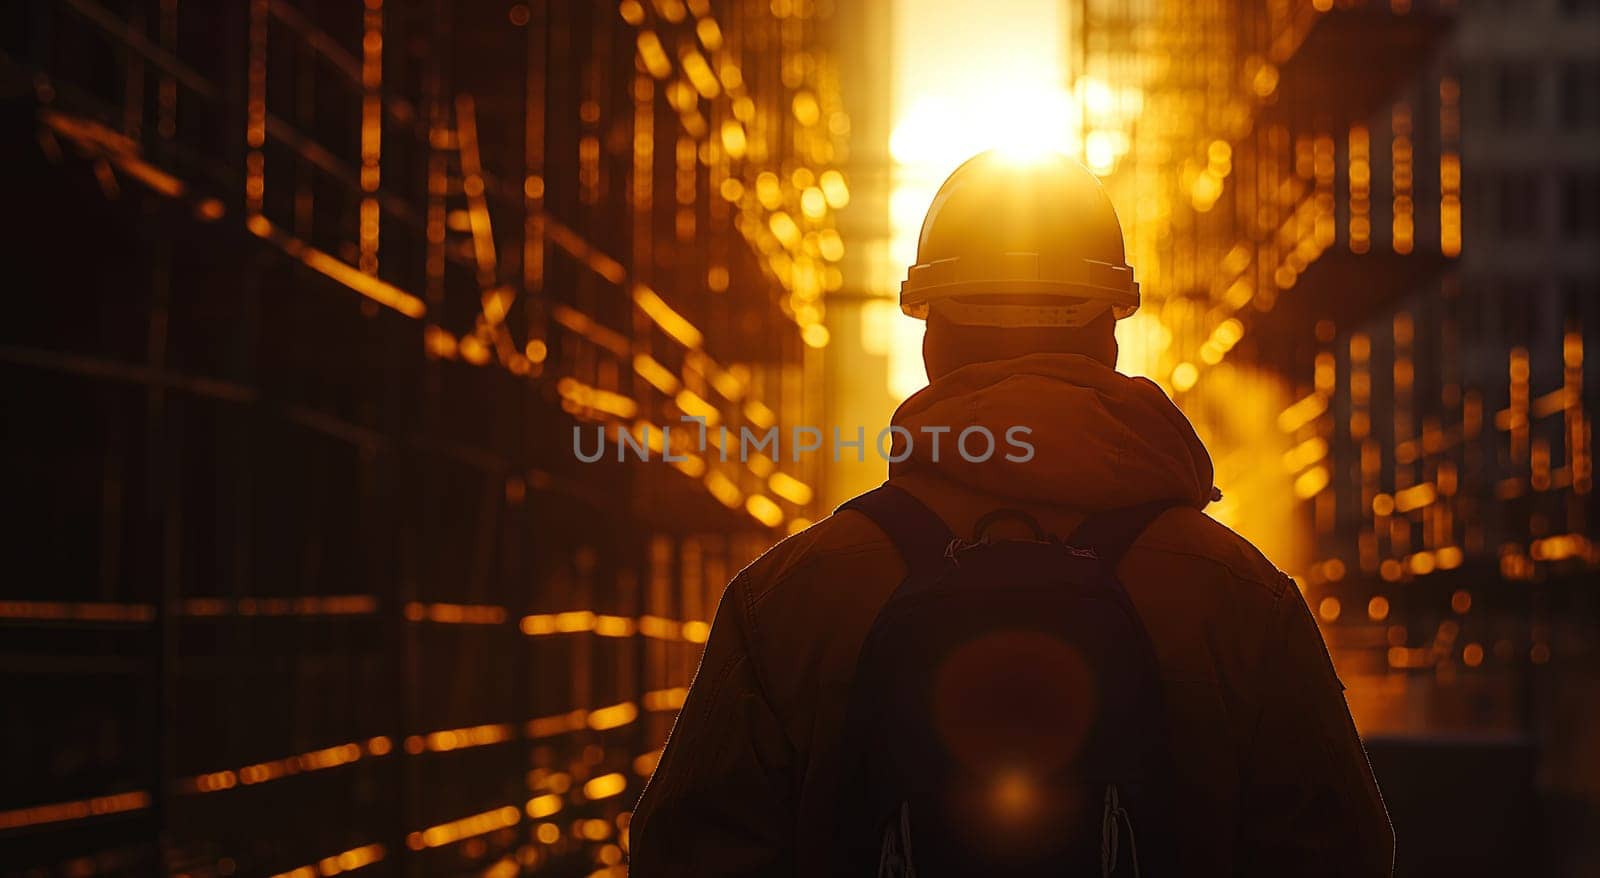 Construction Worker at Sunset Amidst Urban Scaffoldings by chrisroll